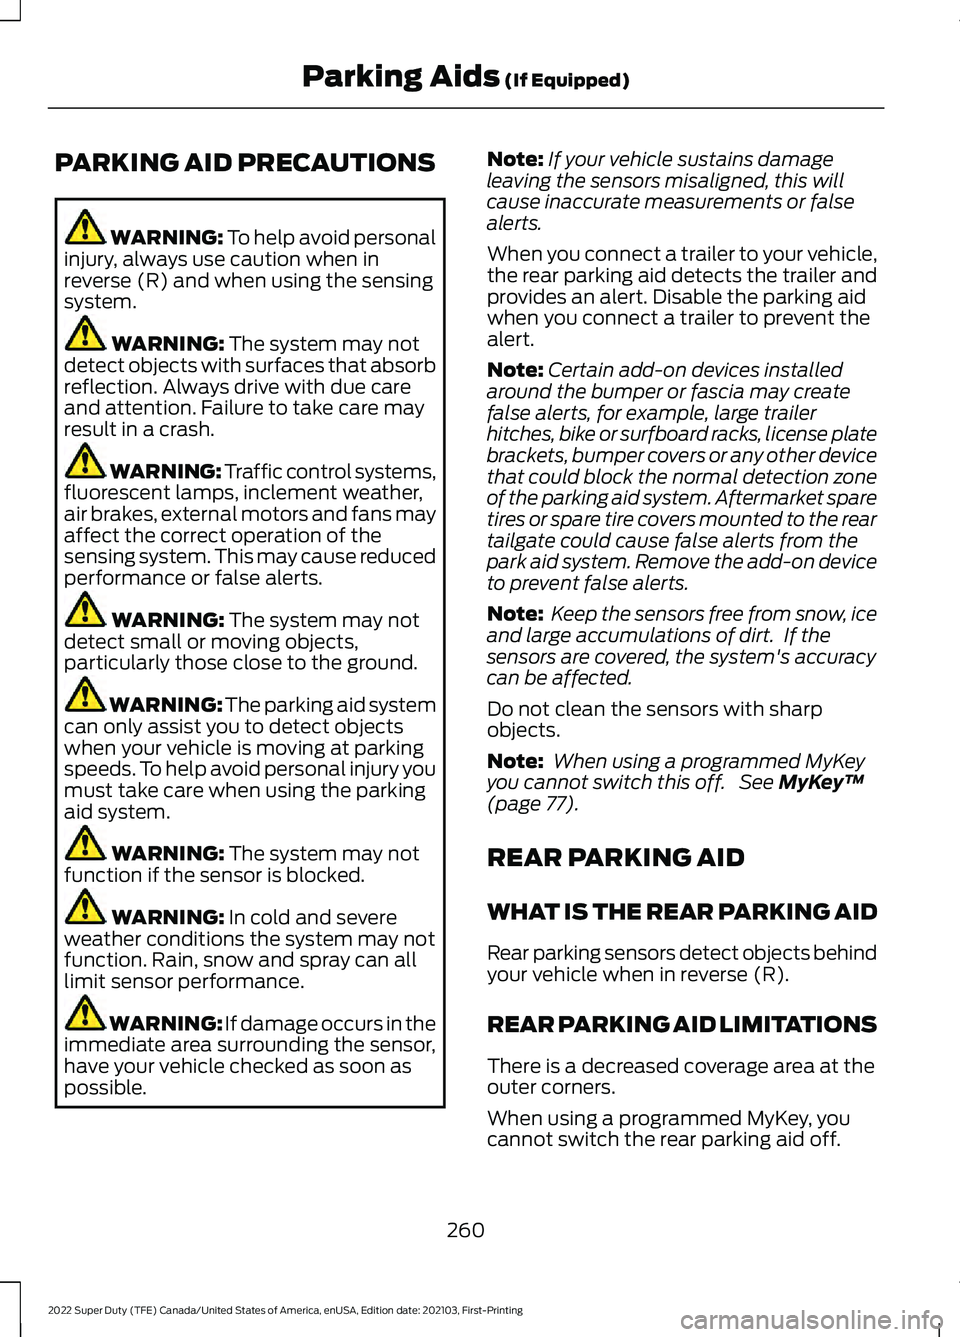 FORD F-250 2022  Owners Manual PARKING AID PRECAUTIONS
WARNING: To help avoid personal
injury, always use caution when in
reverse (R) and when using the sensing
system. WARNING: 
The system may not
detect objects with surfaces that